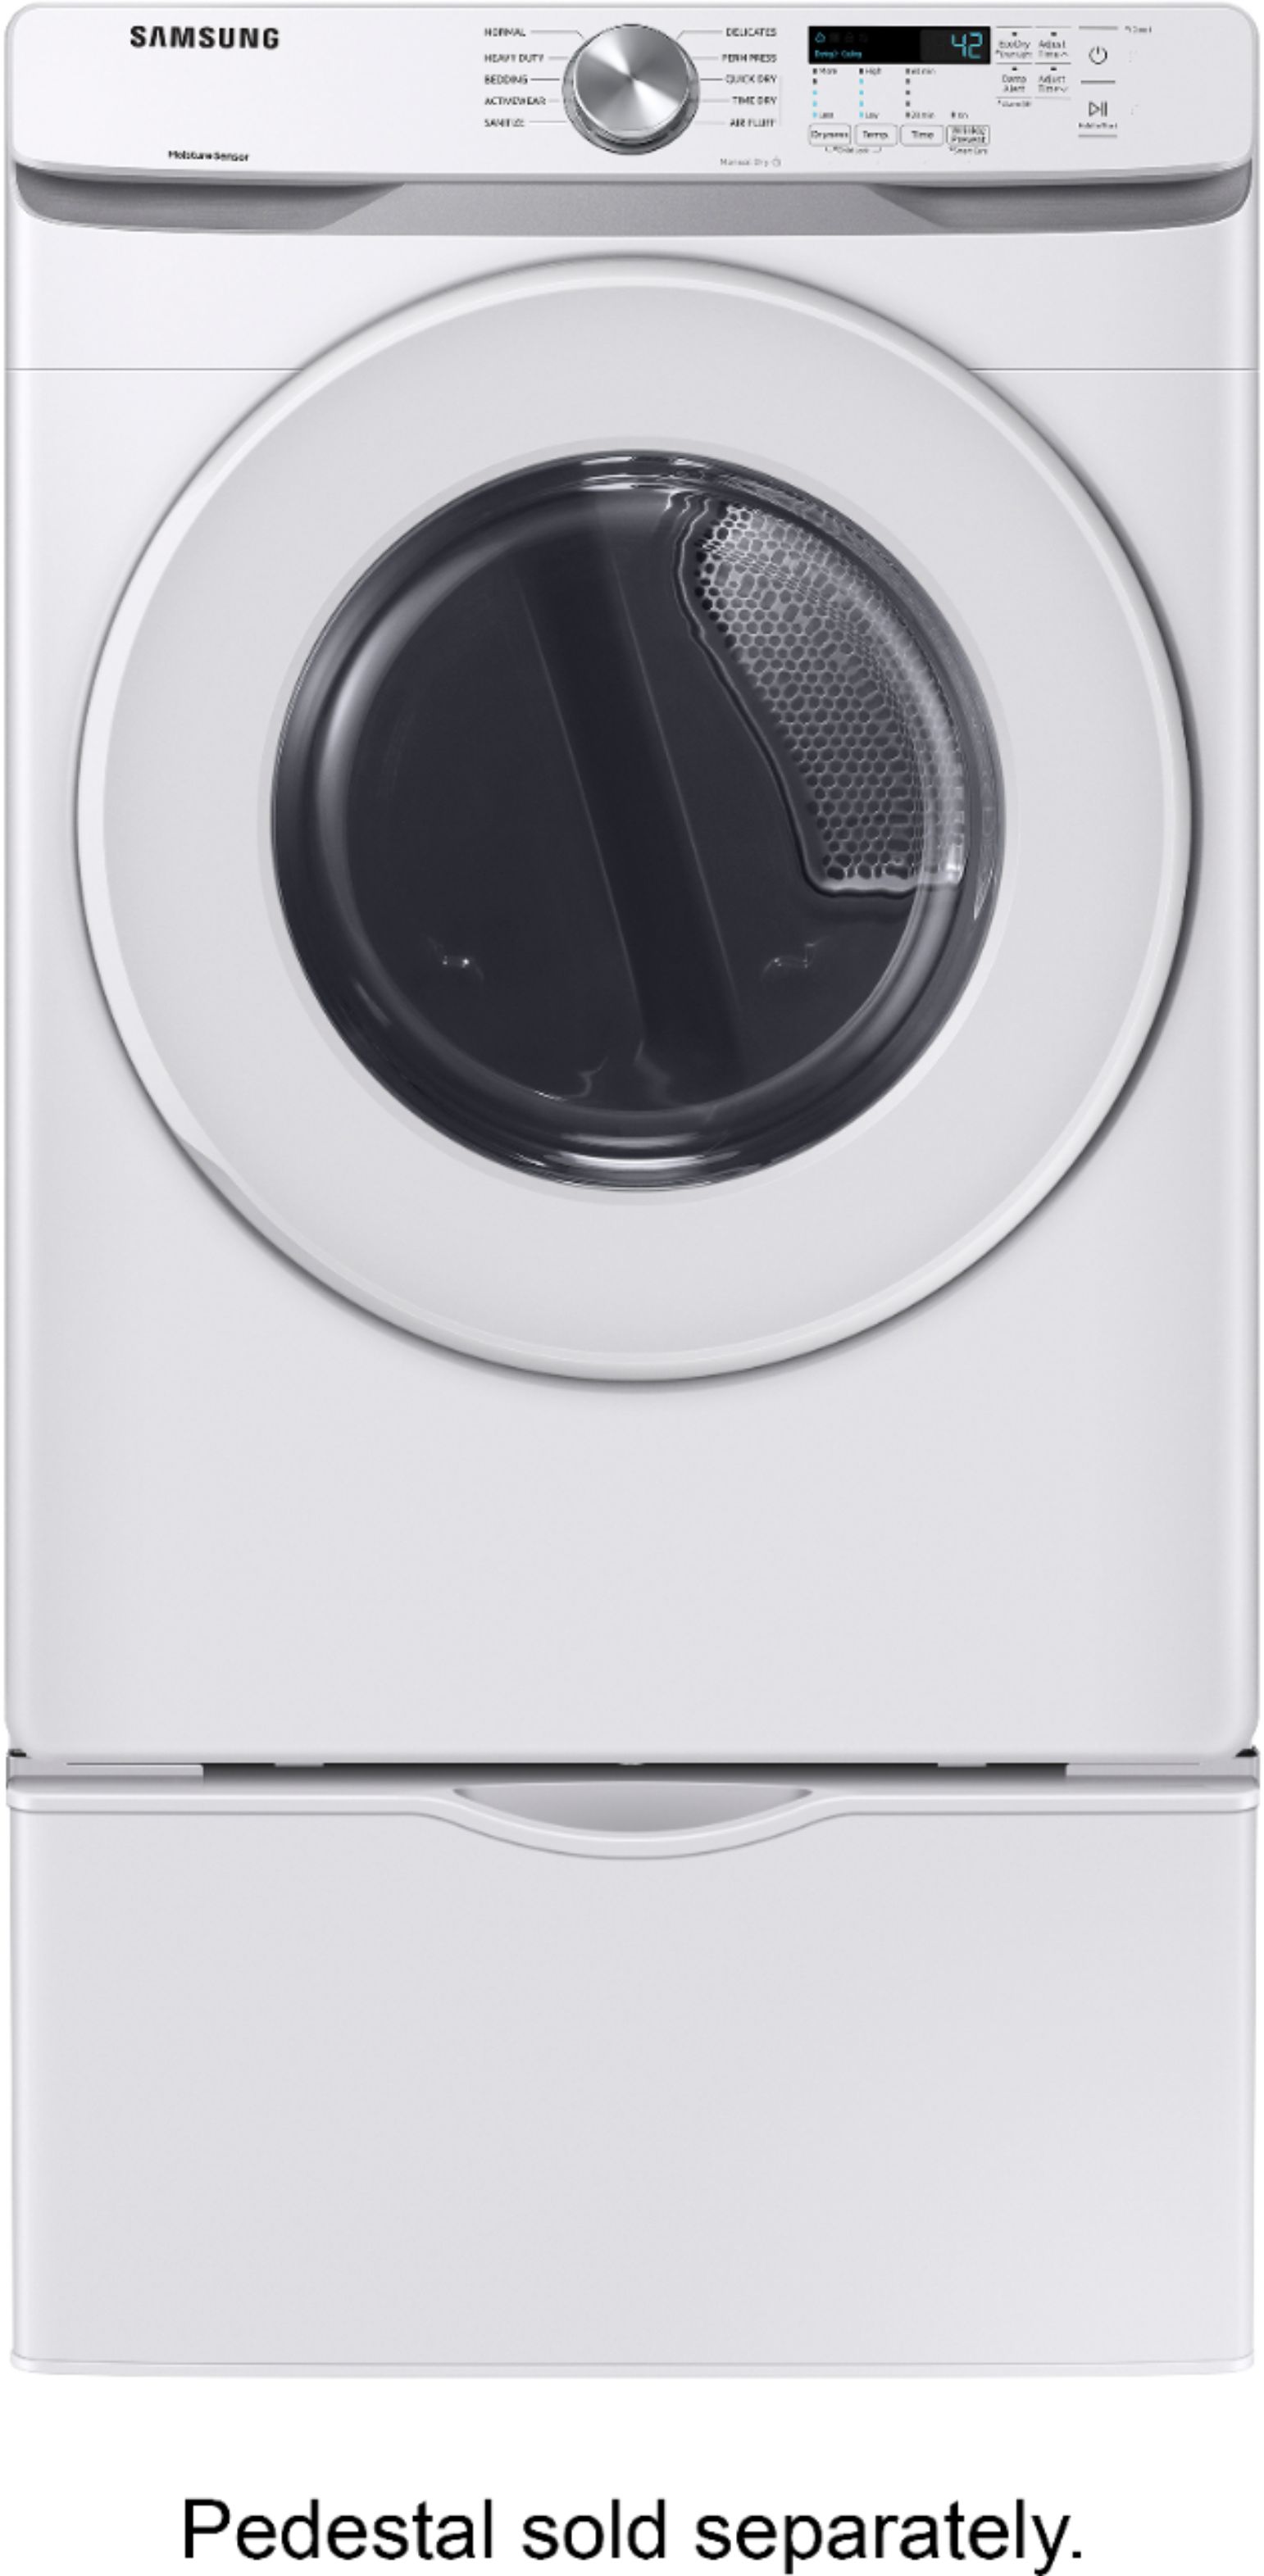 GE 7.4 cu. ft. Top Load Gas Dryer with Sensor Dry White on White